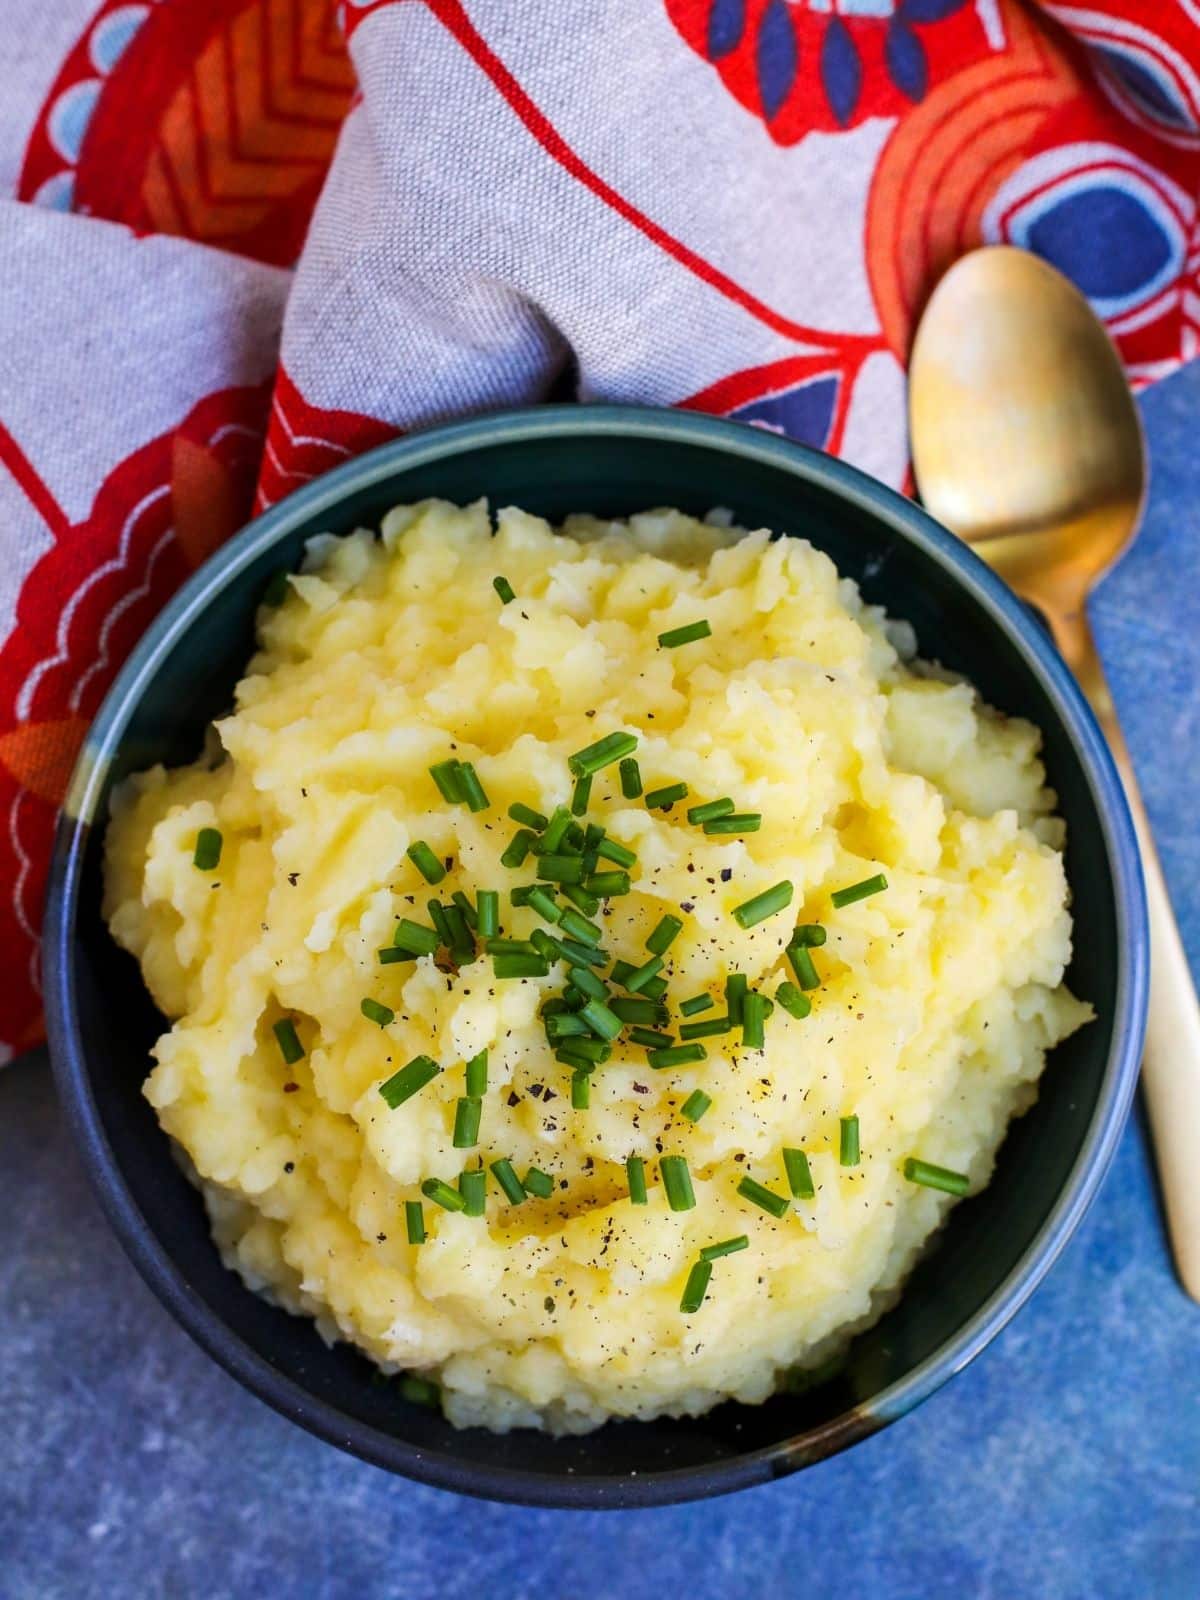 Bowl of mashed potatoes topped with chives with a gold spoon and orange and gray napkin.